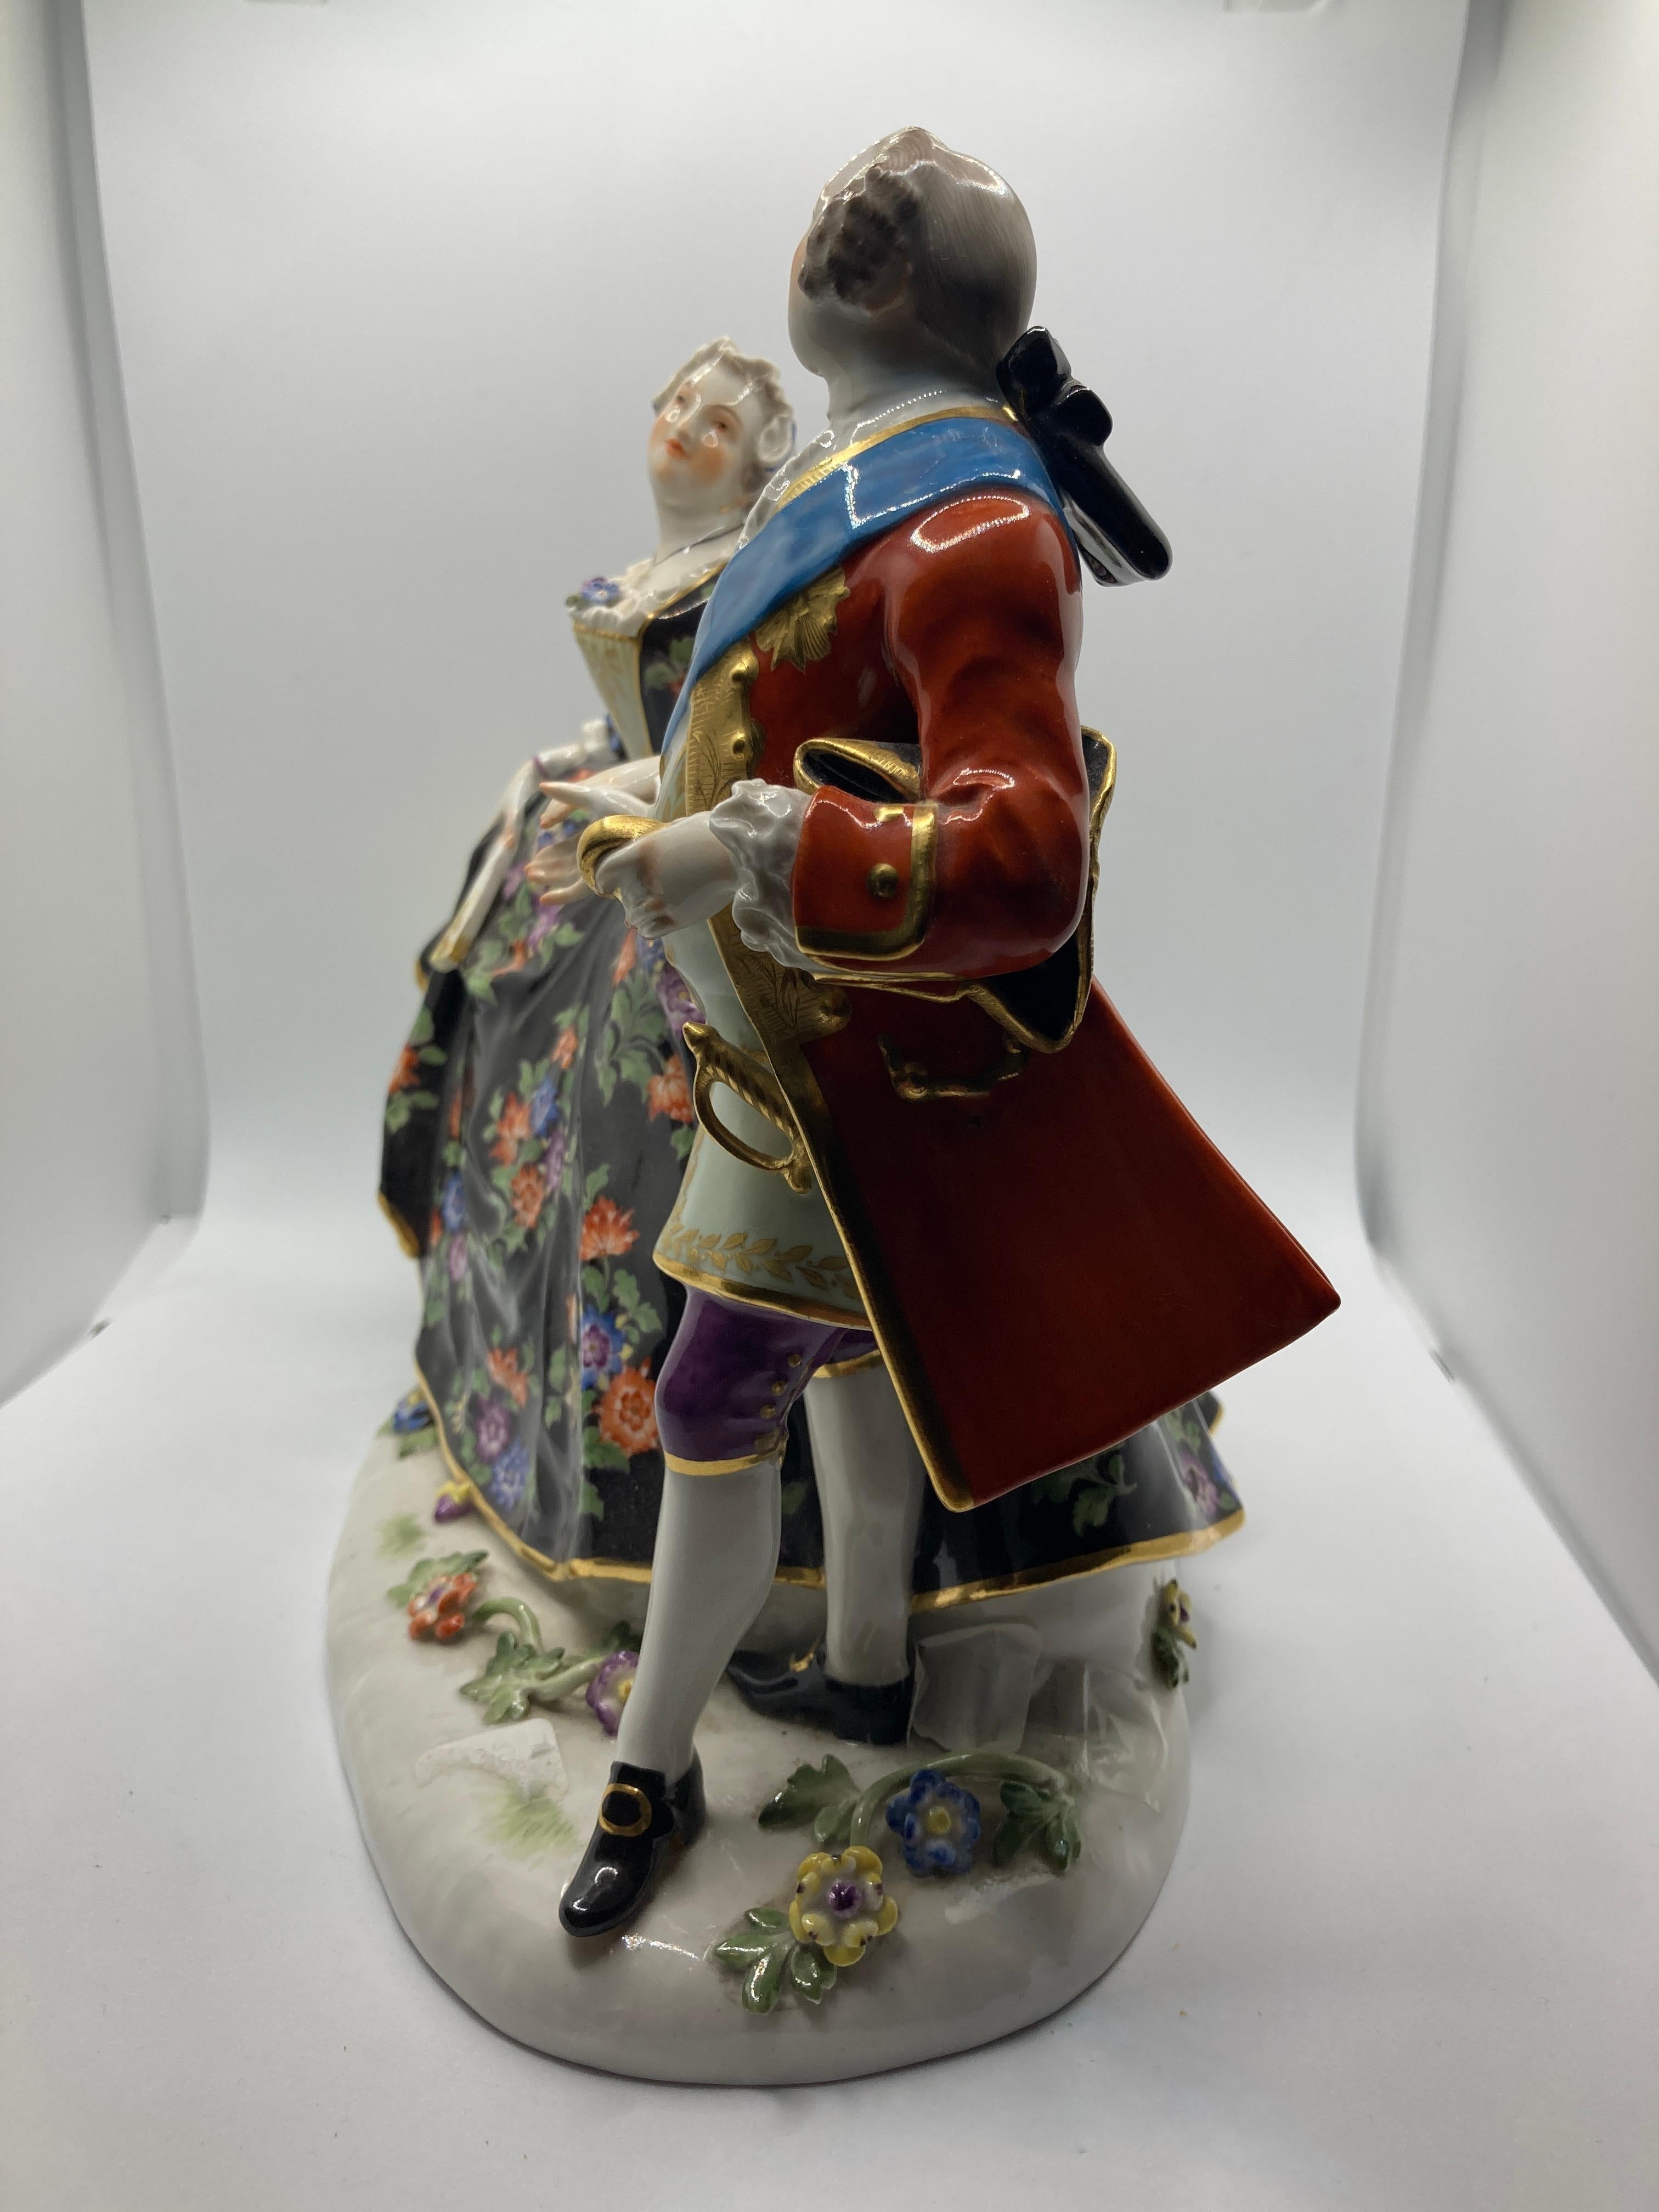 Meissen Figures at a Ball , Model No 550, 20th Century version 

Cavalier with the Polish Order of the White Eagle in his hand (here as a golden box), the lady with a cross pendant (originally conceived with a medal pendant). Colourfully decorated.